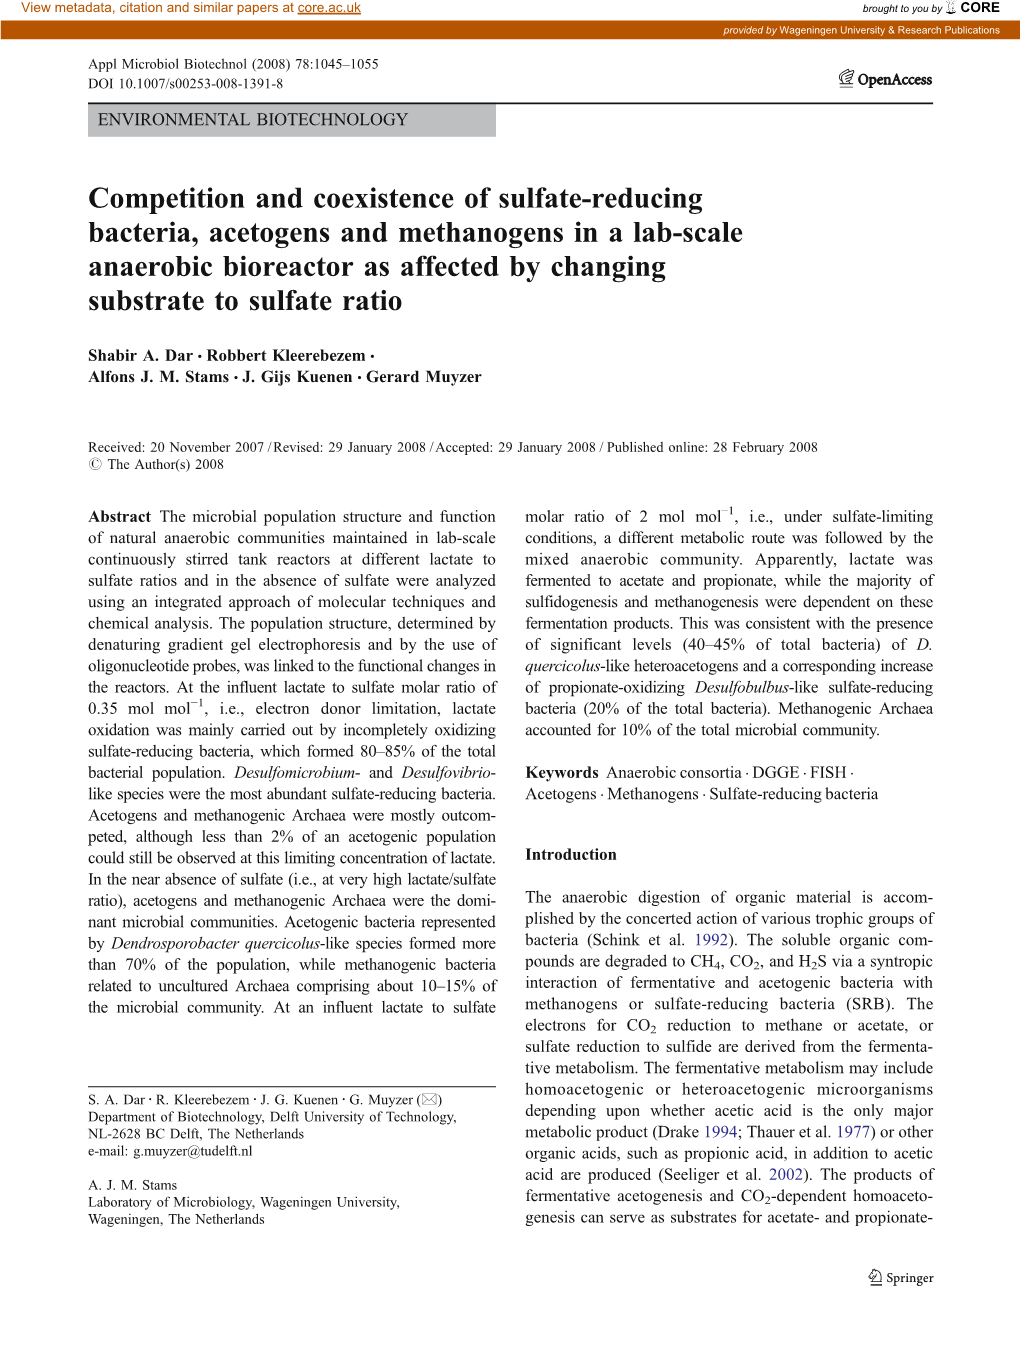 Competition and Coexistence of Sulfate-Reducing Bacteria